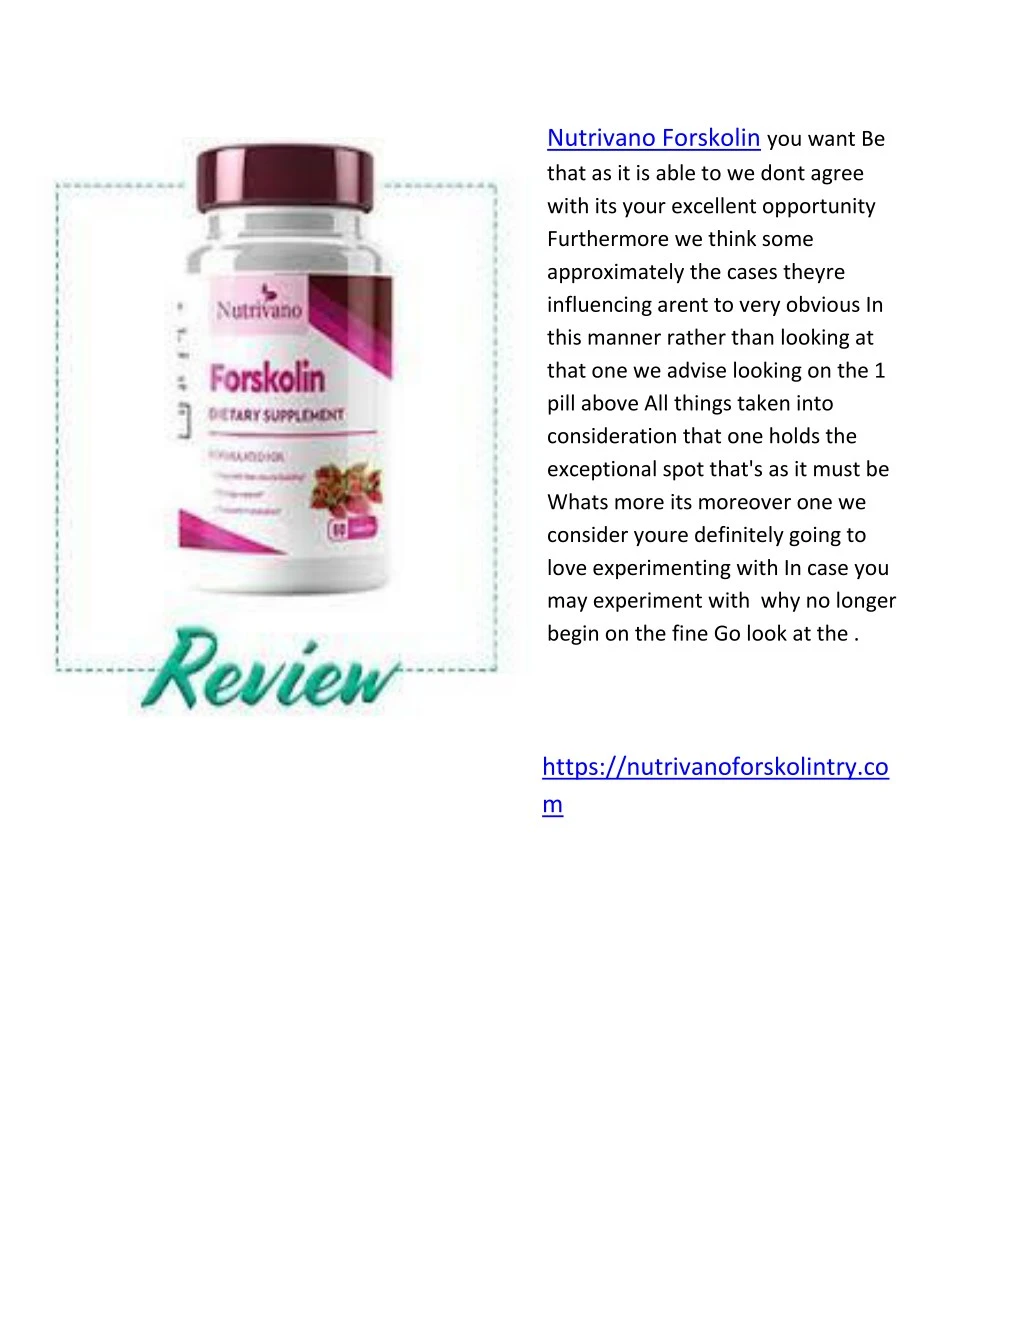 nutrivano forskolin you want be that